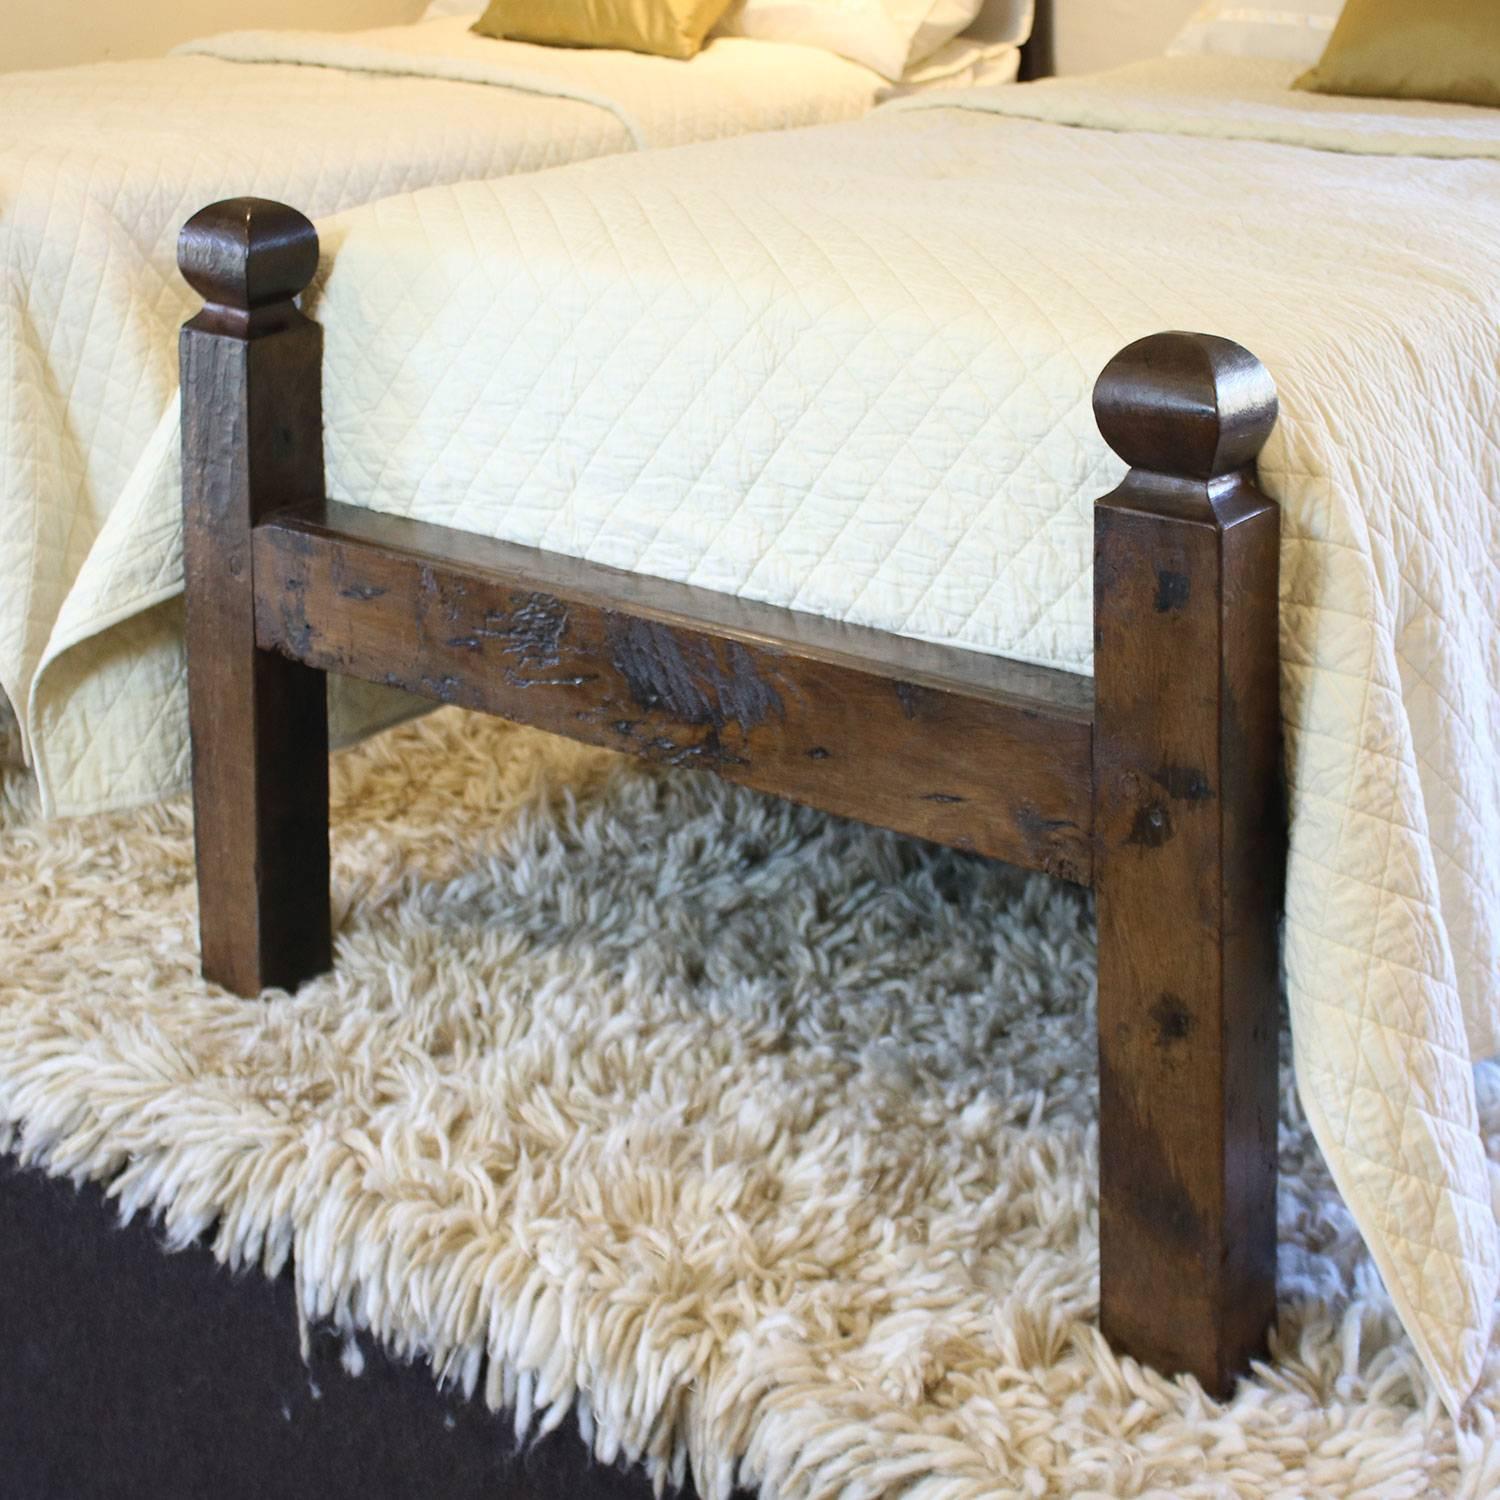 A handsome pair of twin beds made from original 18th century oak panels at the turn of the 20th century.

These beds accept 3ft wide bases and mattresses (36 in or 90cm) and the beds can stand together to make a 6ft wide bed (72 inches or 180cm)